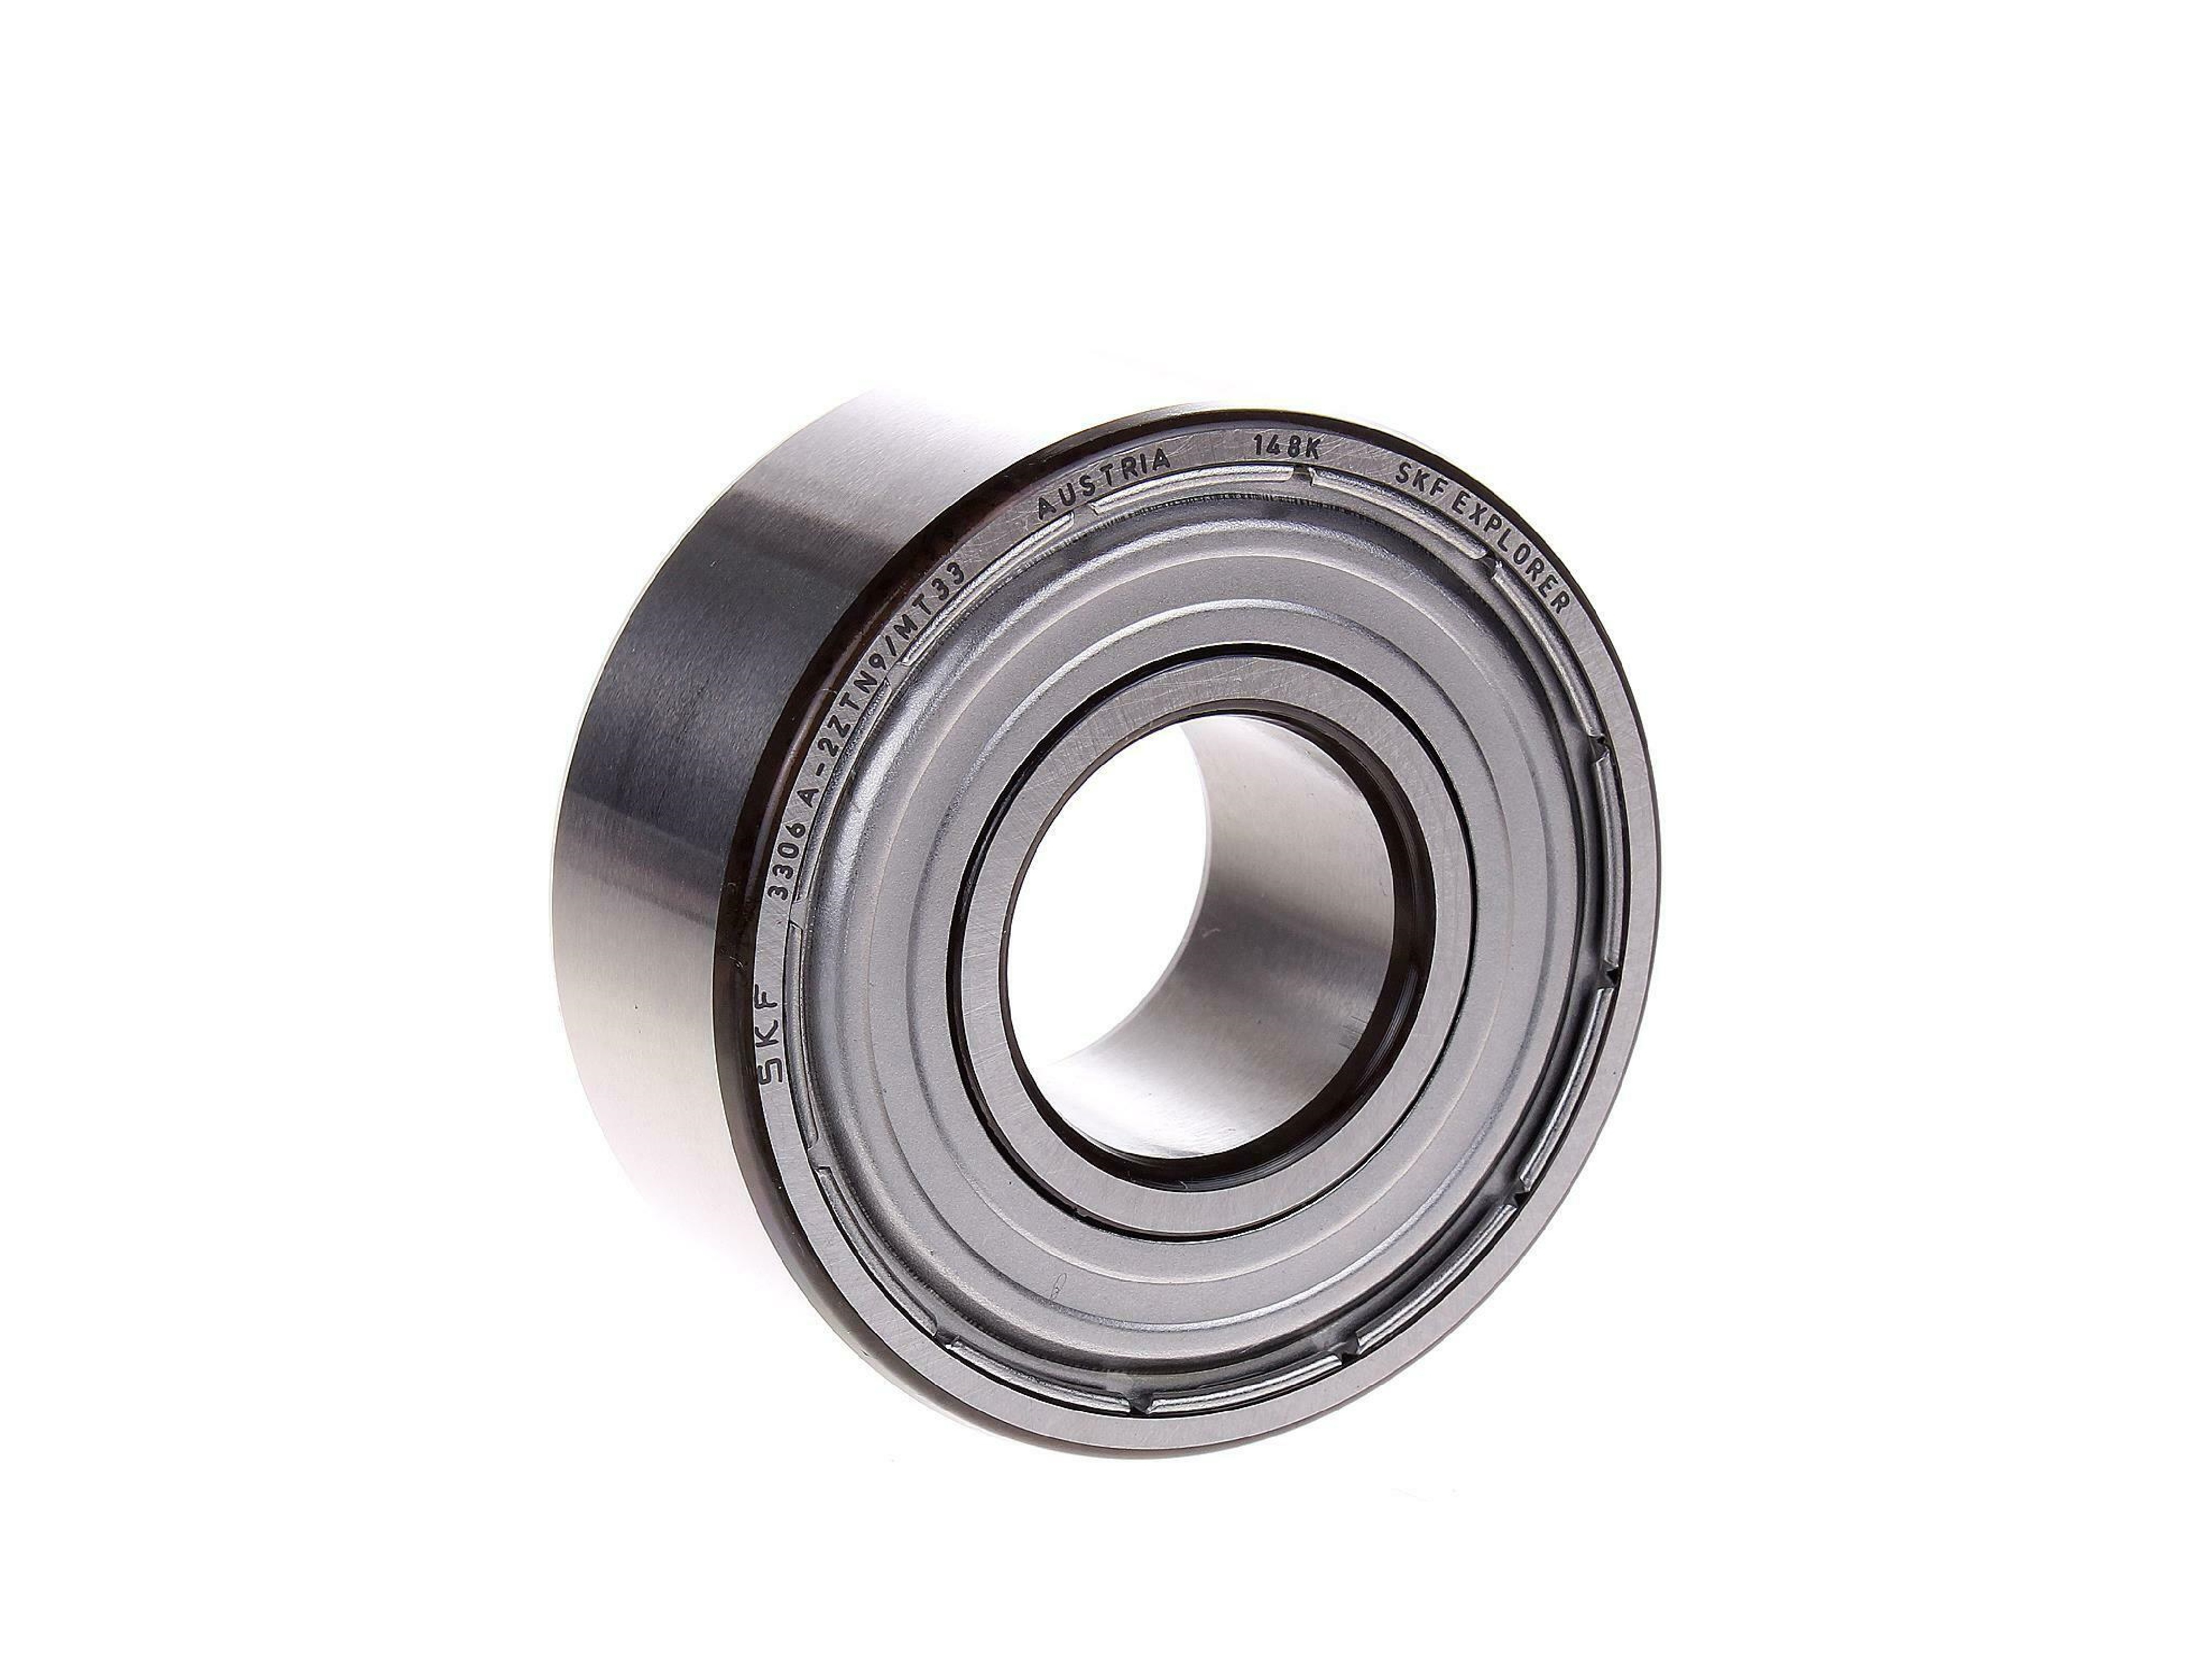 3209A-2ZTN9/MT33 SKF Double Row Angular Contact Ball Bearing - Shielded 45mm x 85mm x 30.2mm